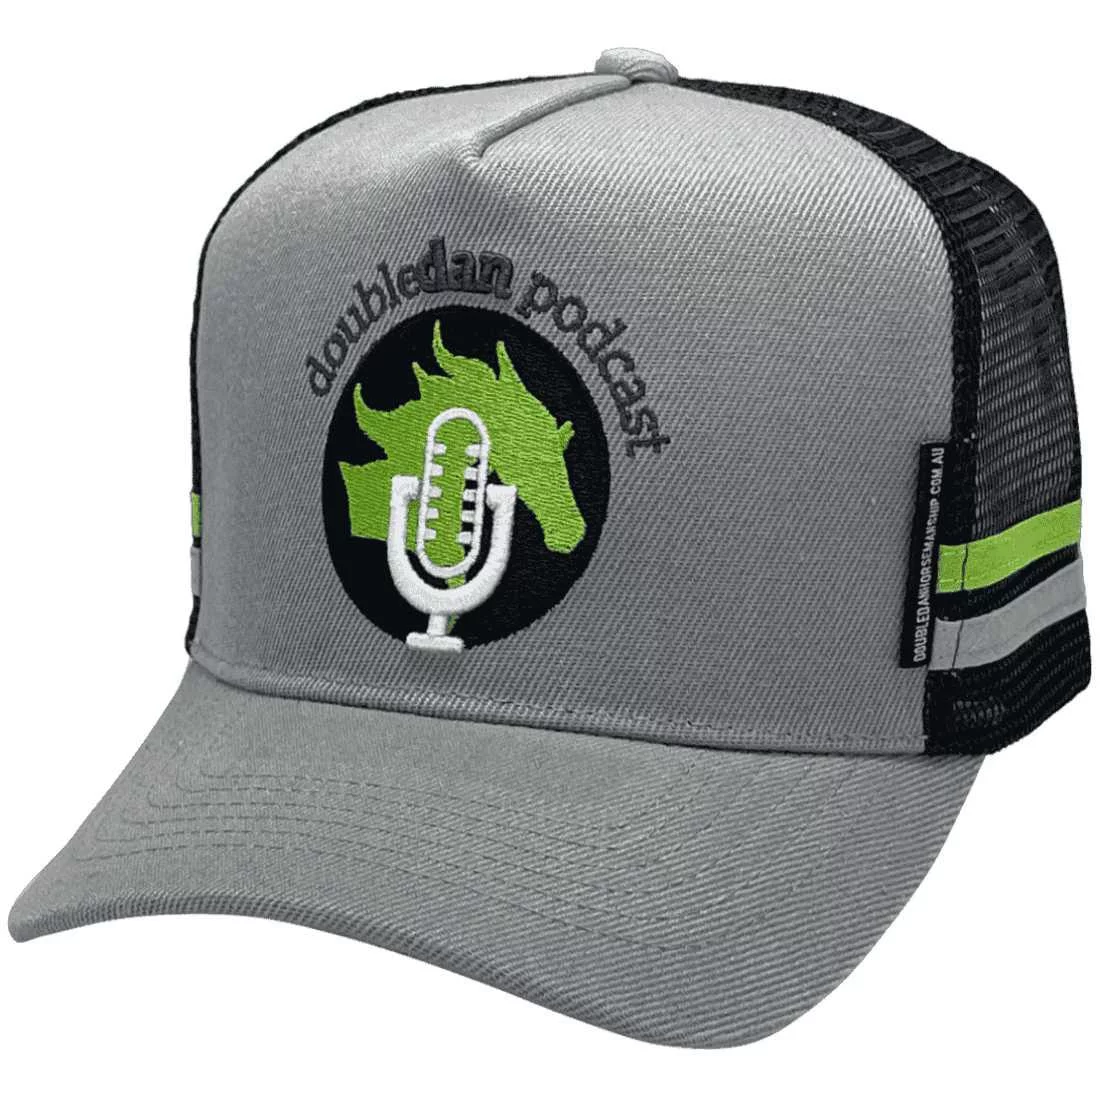 Double Dan Podcast Kootingal NSW HP Midrange Aussie Trucker Hat with Australian Head Fit Crown and Double Side Bands Grey Black Lime